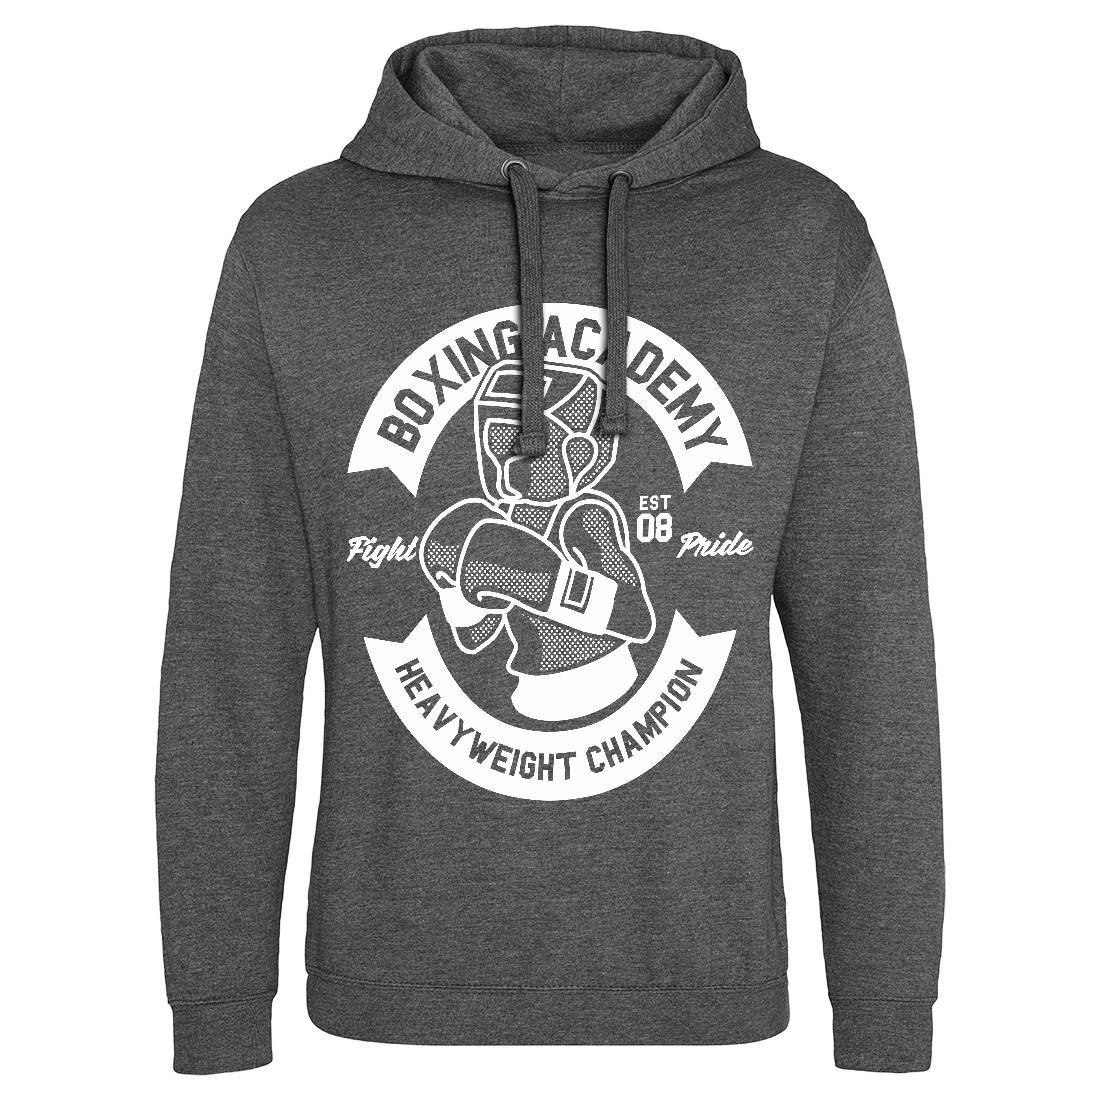 Boxing Academy Mens Hoodie Without Pocket Gym A213